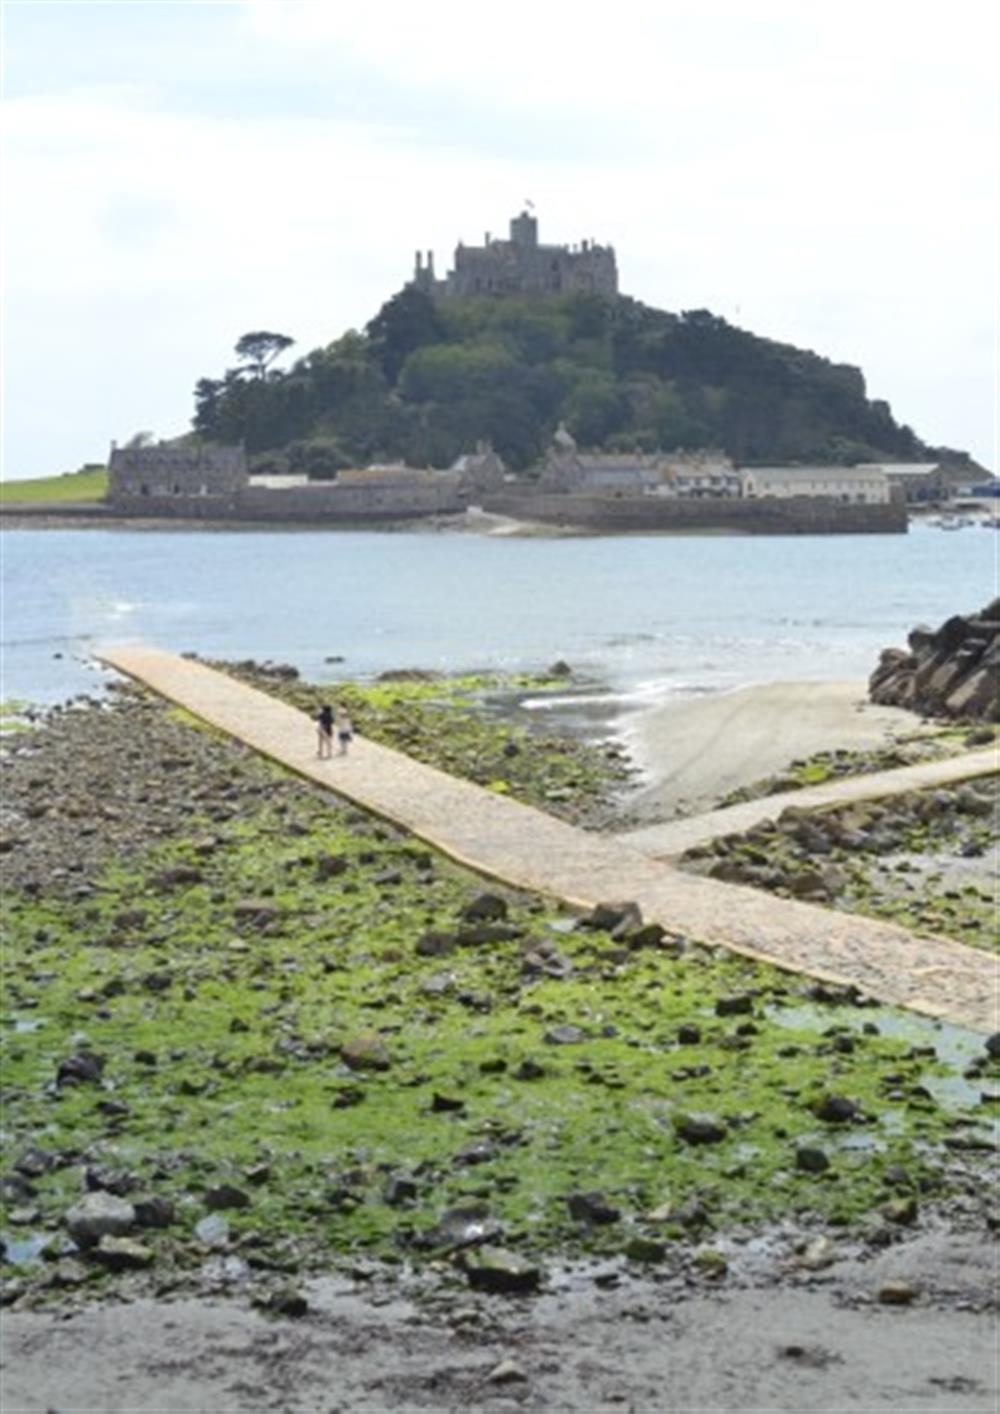 St Michael's Mount at Marzion is a 45 minute drive away. at Crags 14 in Maenporth